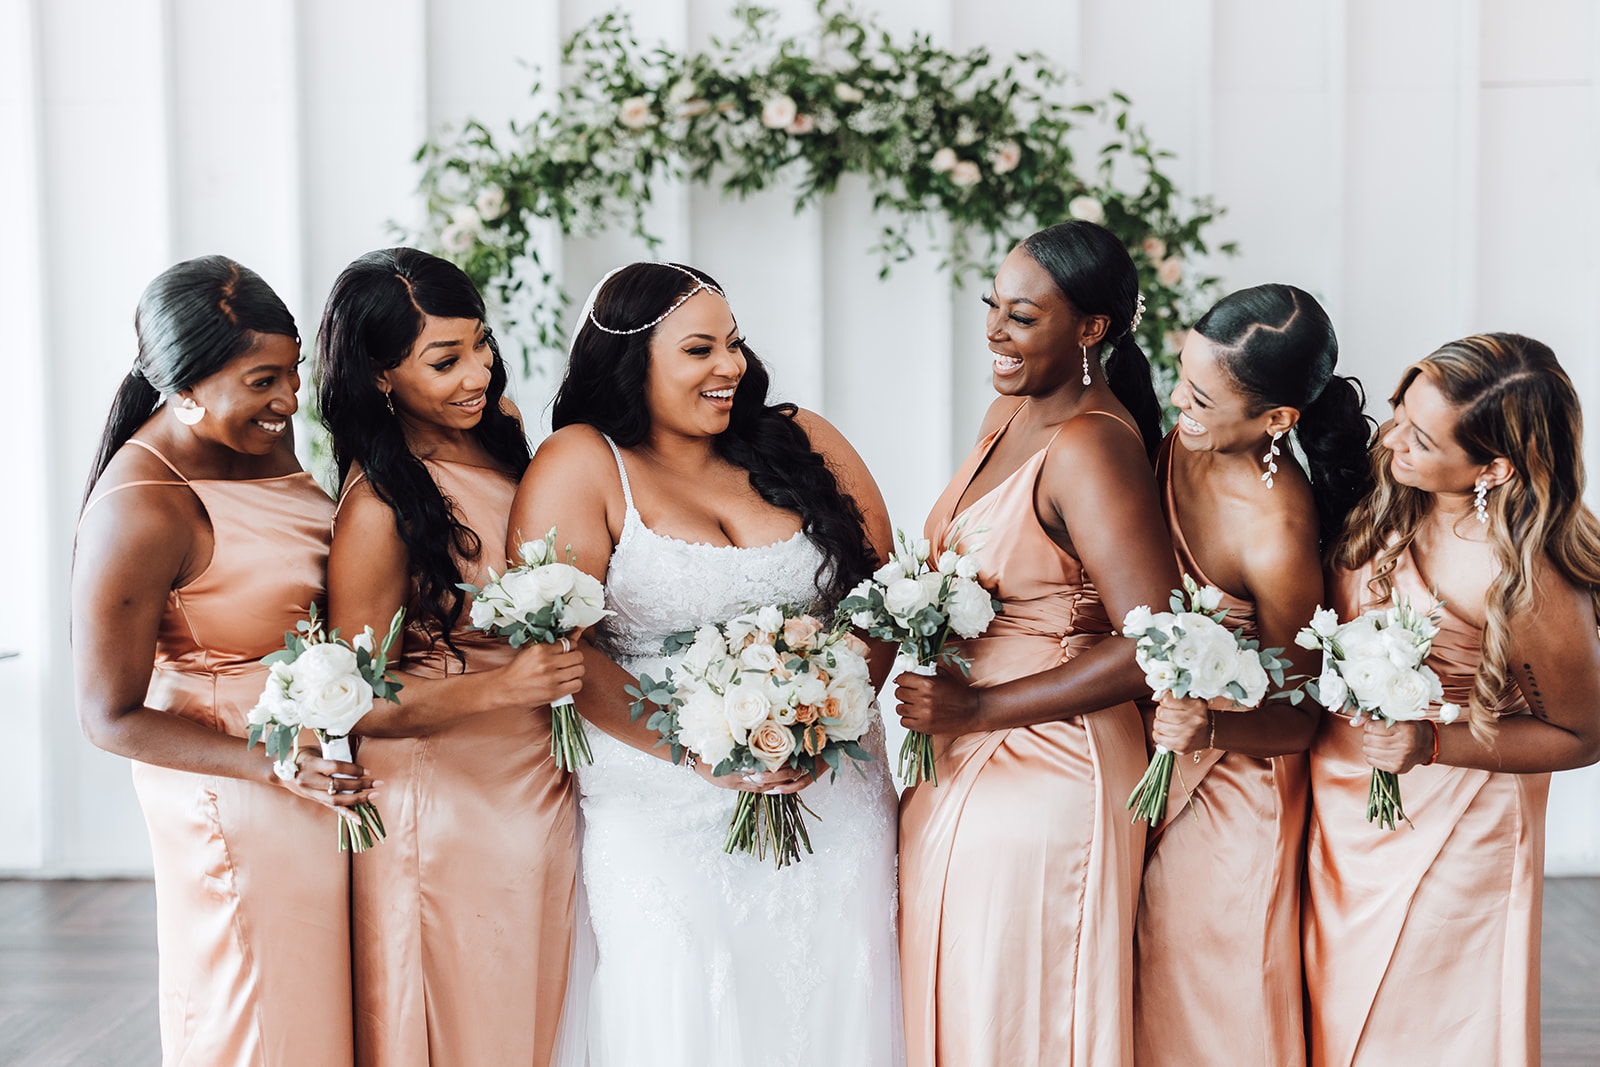 A bride and her wedding party laugh while holding their flowers